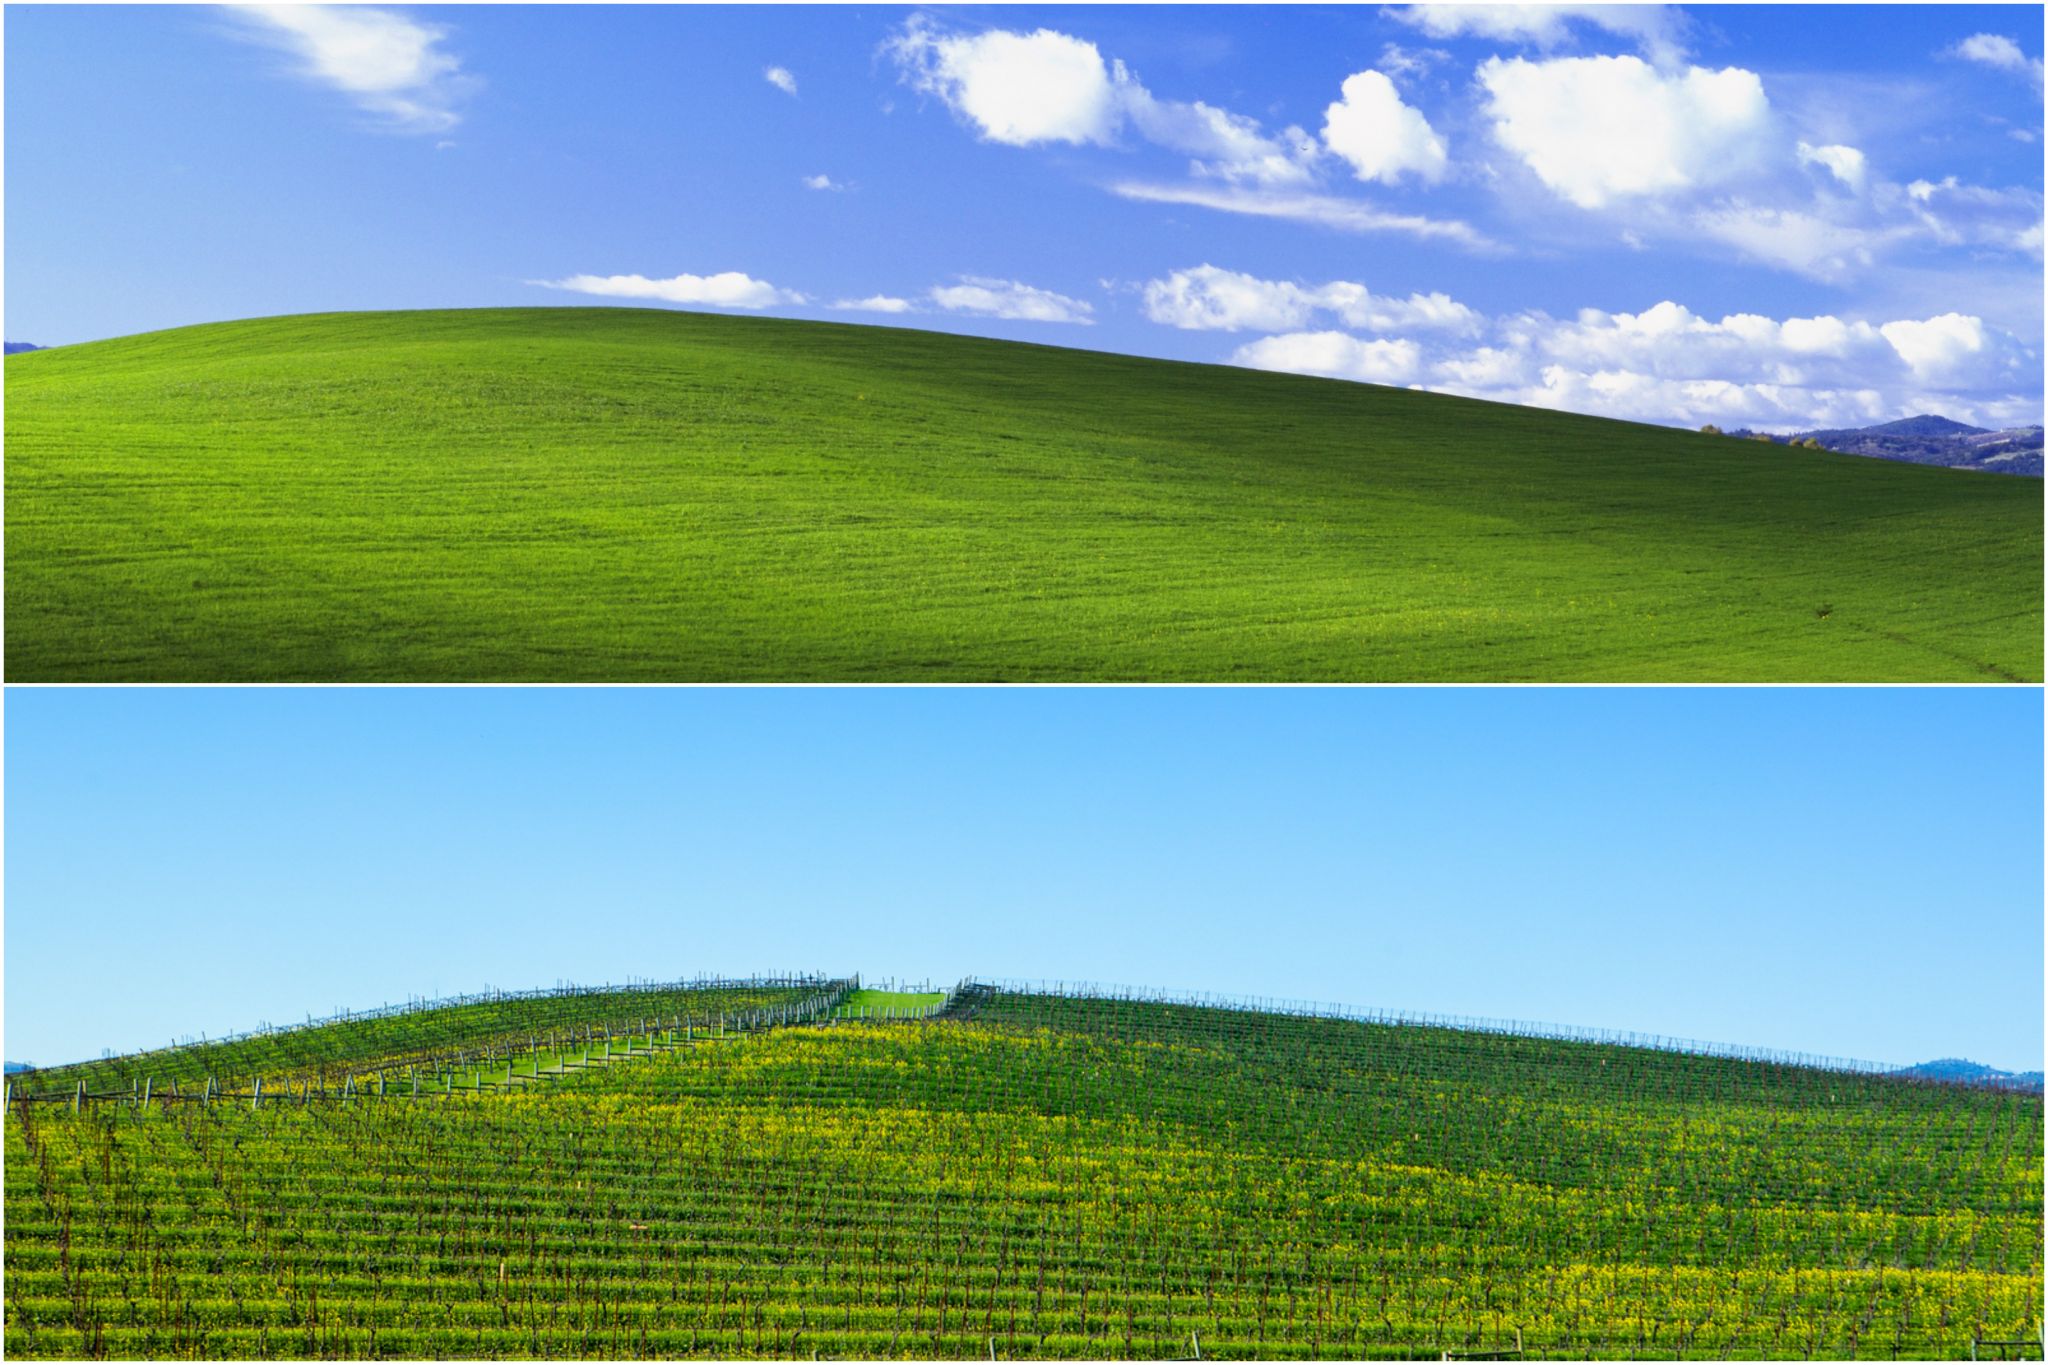 I found the Bay Area hill in Windows XP\'s iconic wallpaper